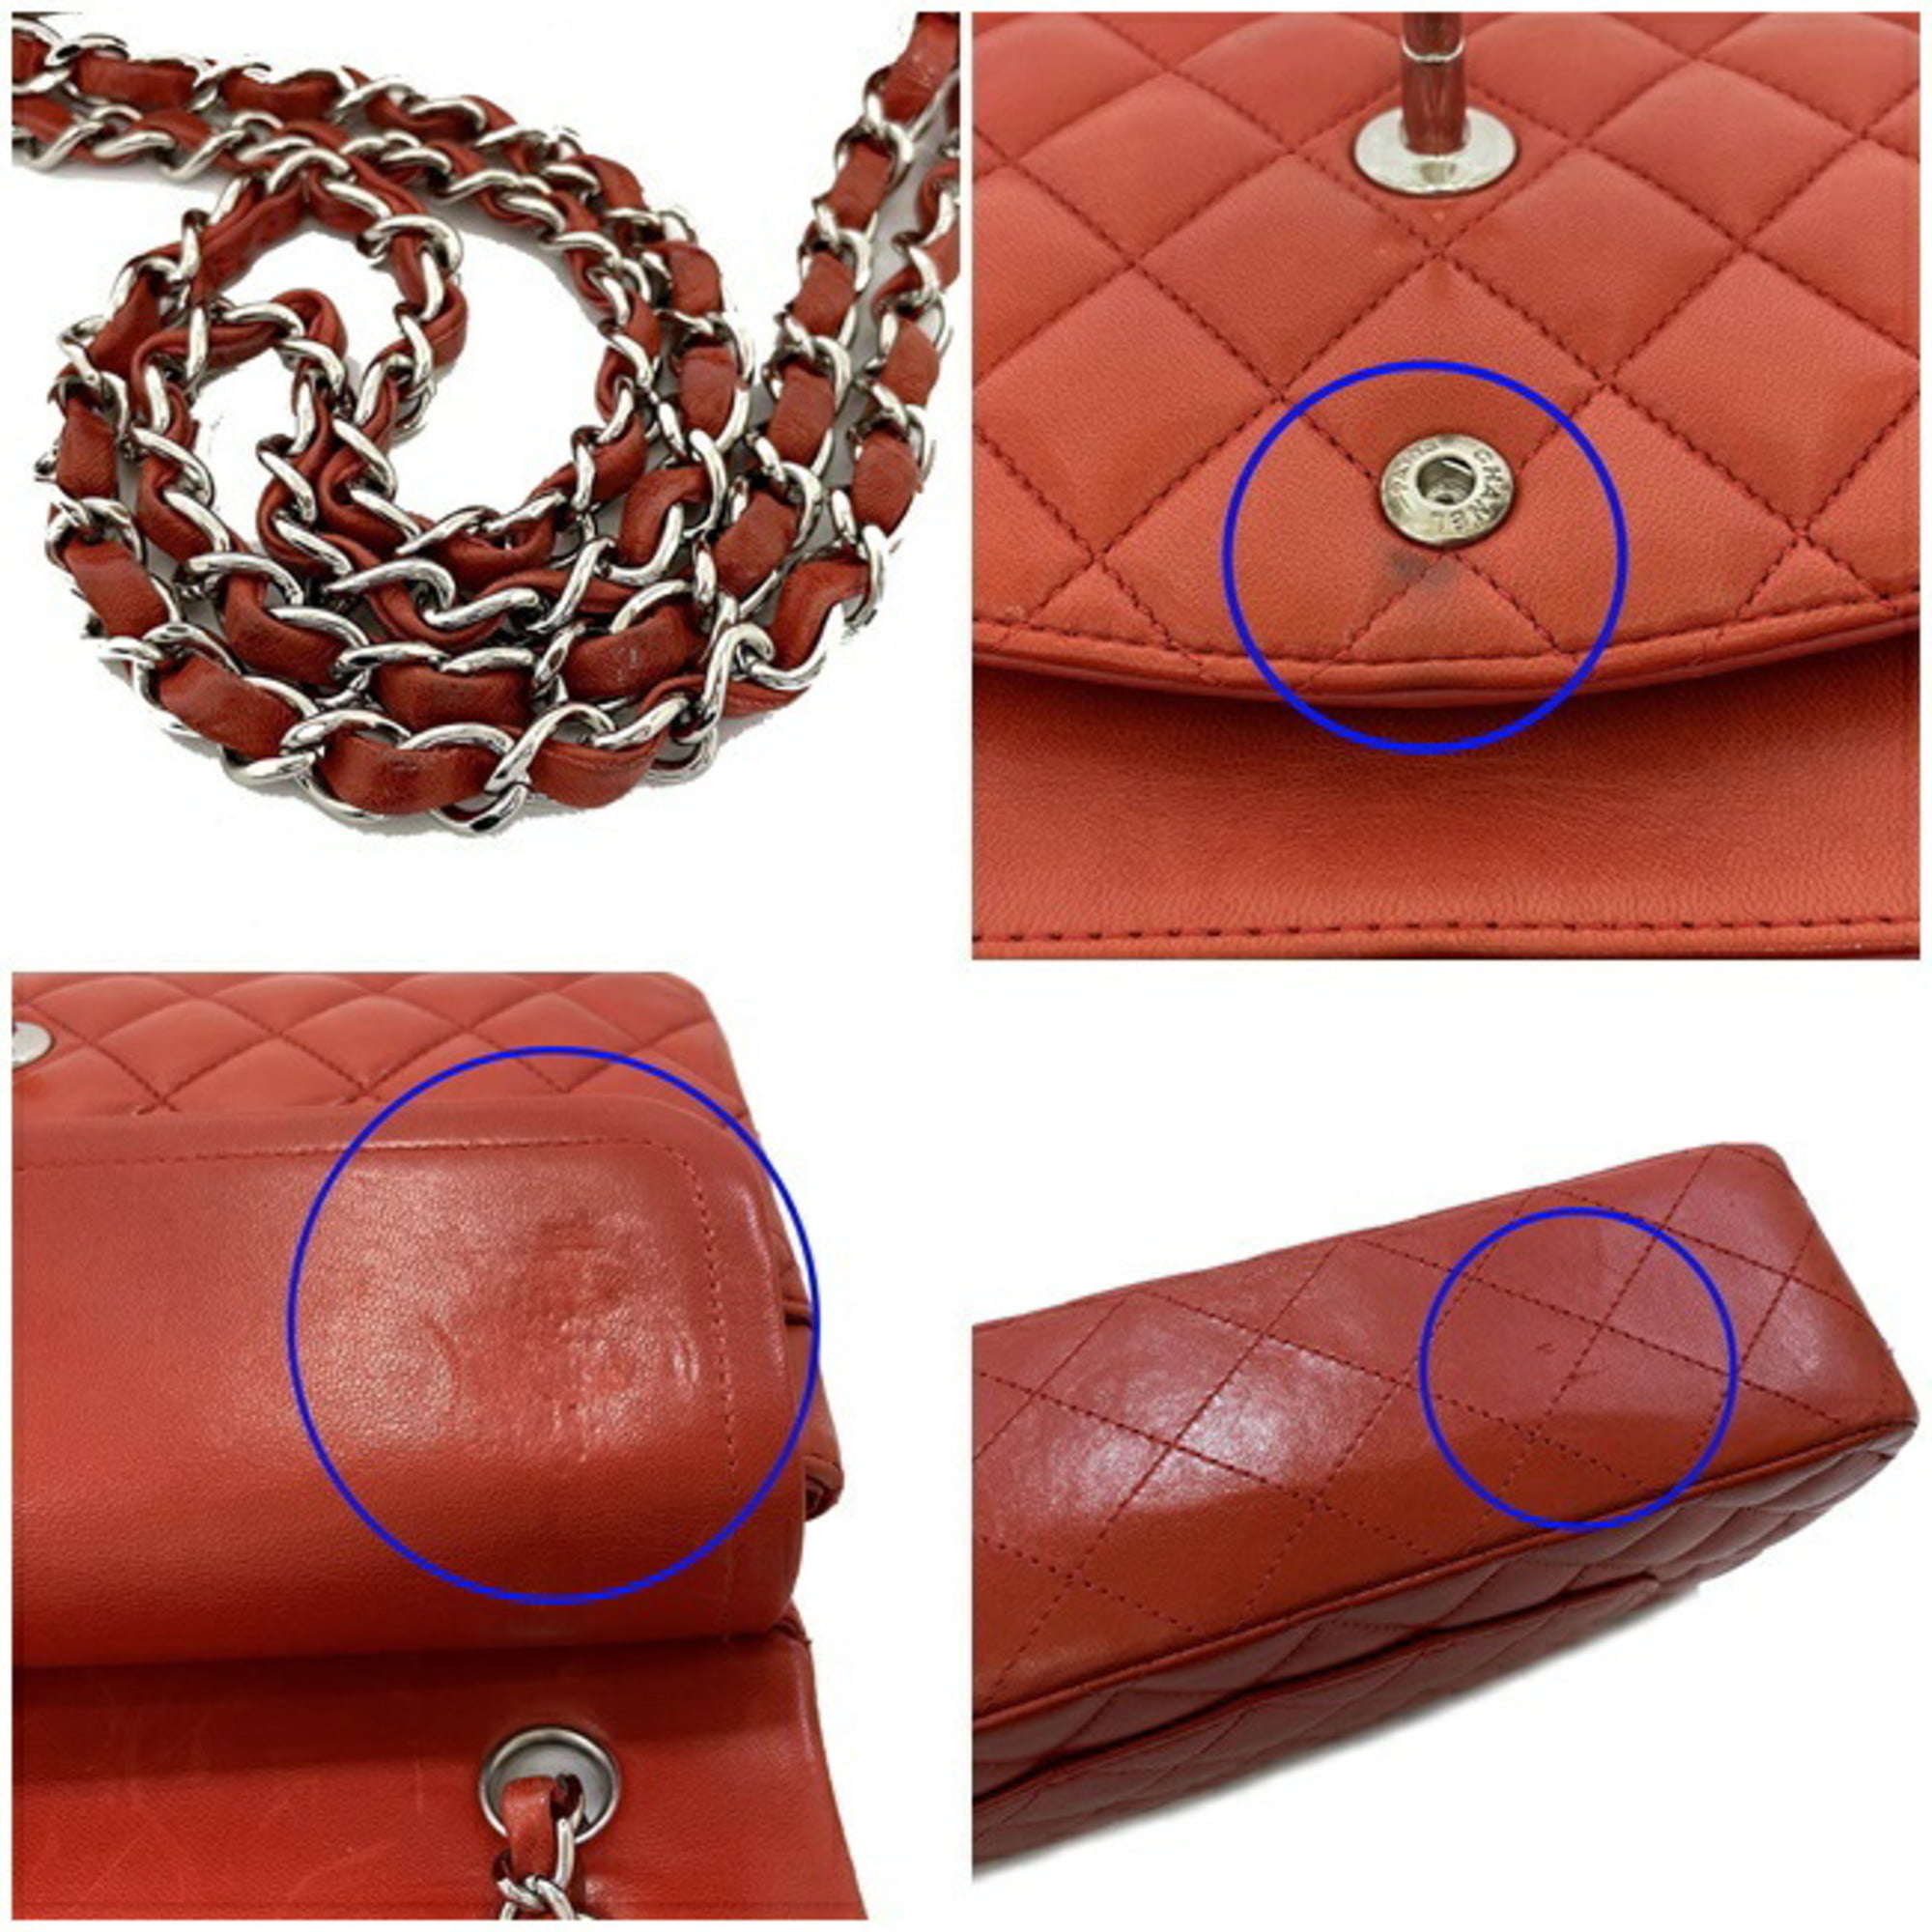 used Pre-owned Chanel Chain Shoulder Bag 25 Red Matrasse A01112 W Flap Leather Lambskin 15s Chanel Coco Mark Turn Lock Quilted Double Handbag (Good)